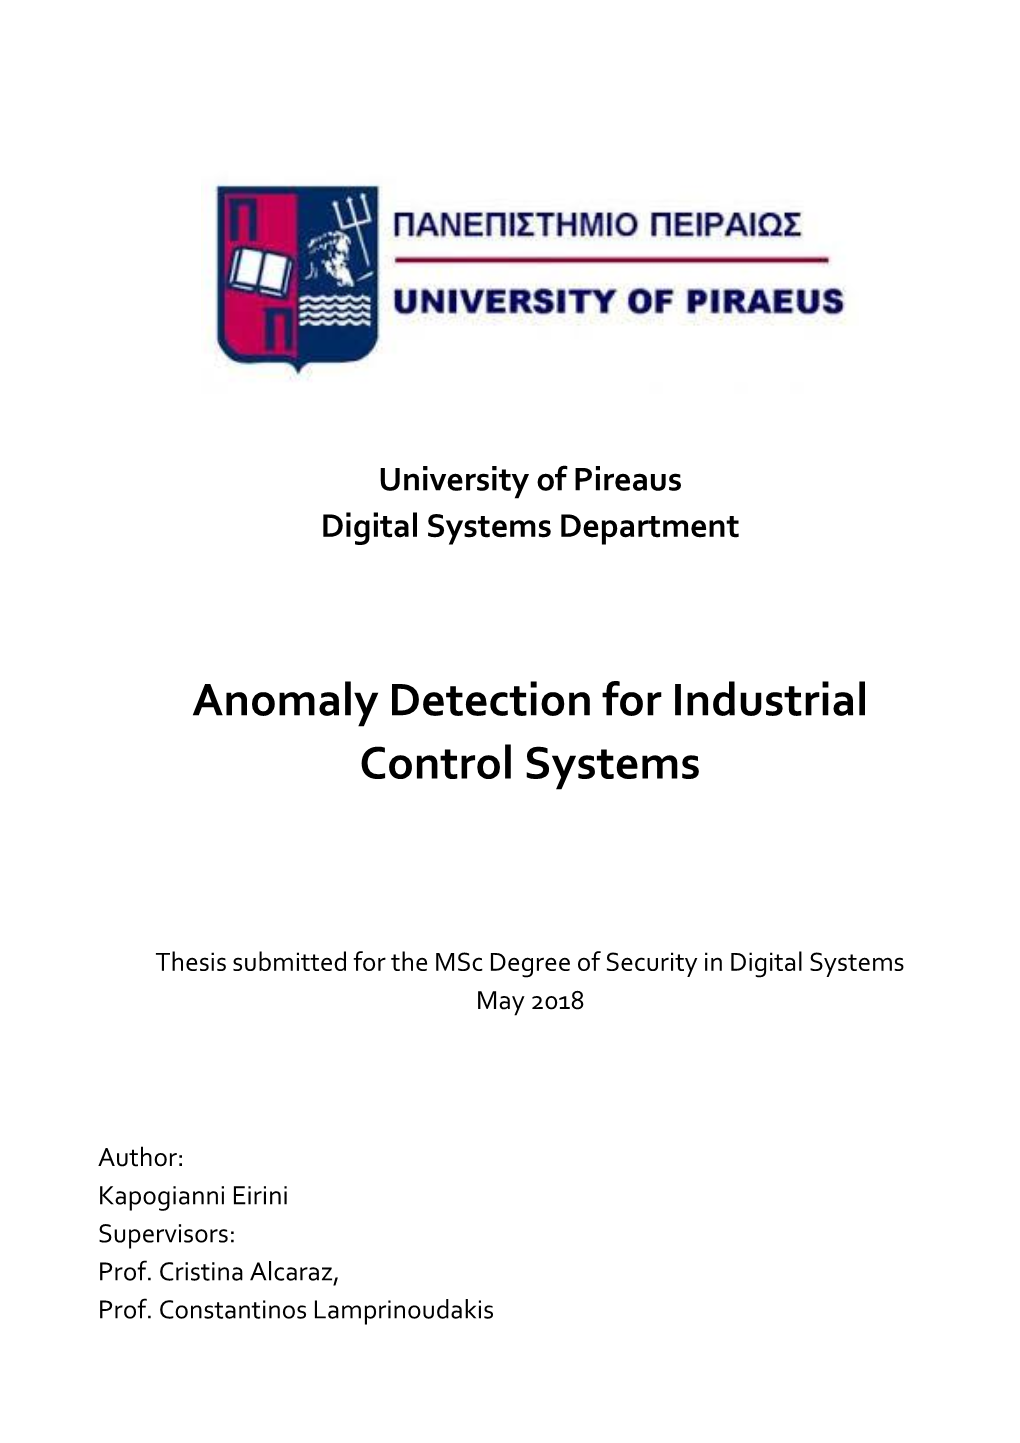 Anomaly Detection for Industrial Control Systems